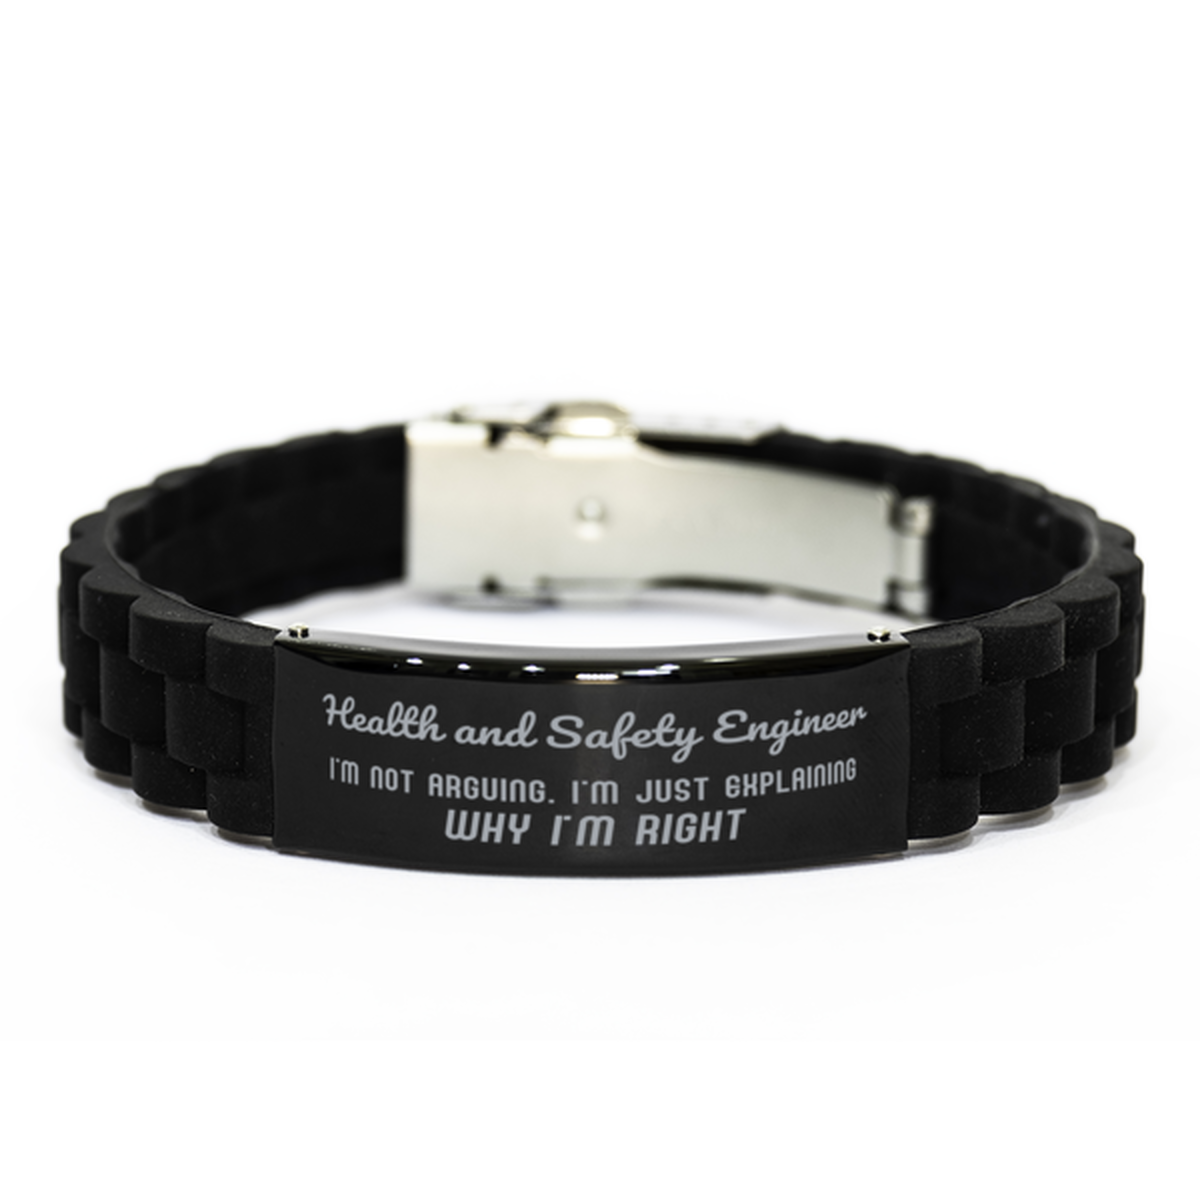 Health and Safety Engineer I'm not Arguing. I'm Just Explaining Why I'm RIGHT Black Glidelock Clasp Bracelet, Funny Saying Quote Health and Safety Engineer Gifts For Health and Safety Engineer Graduation Birthday Christmas Gifts for Men Women Coworker